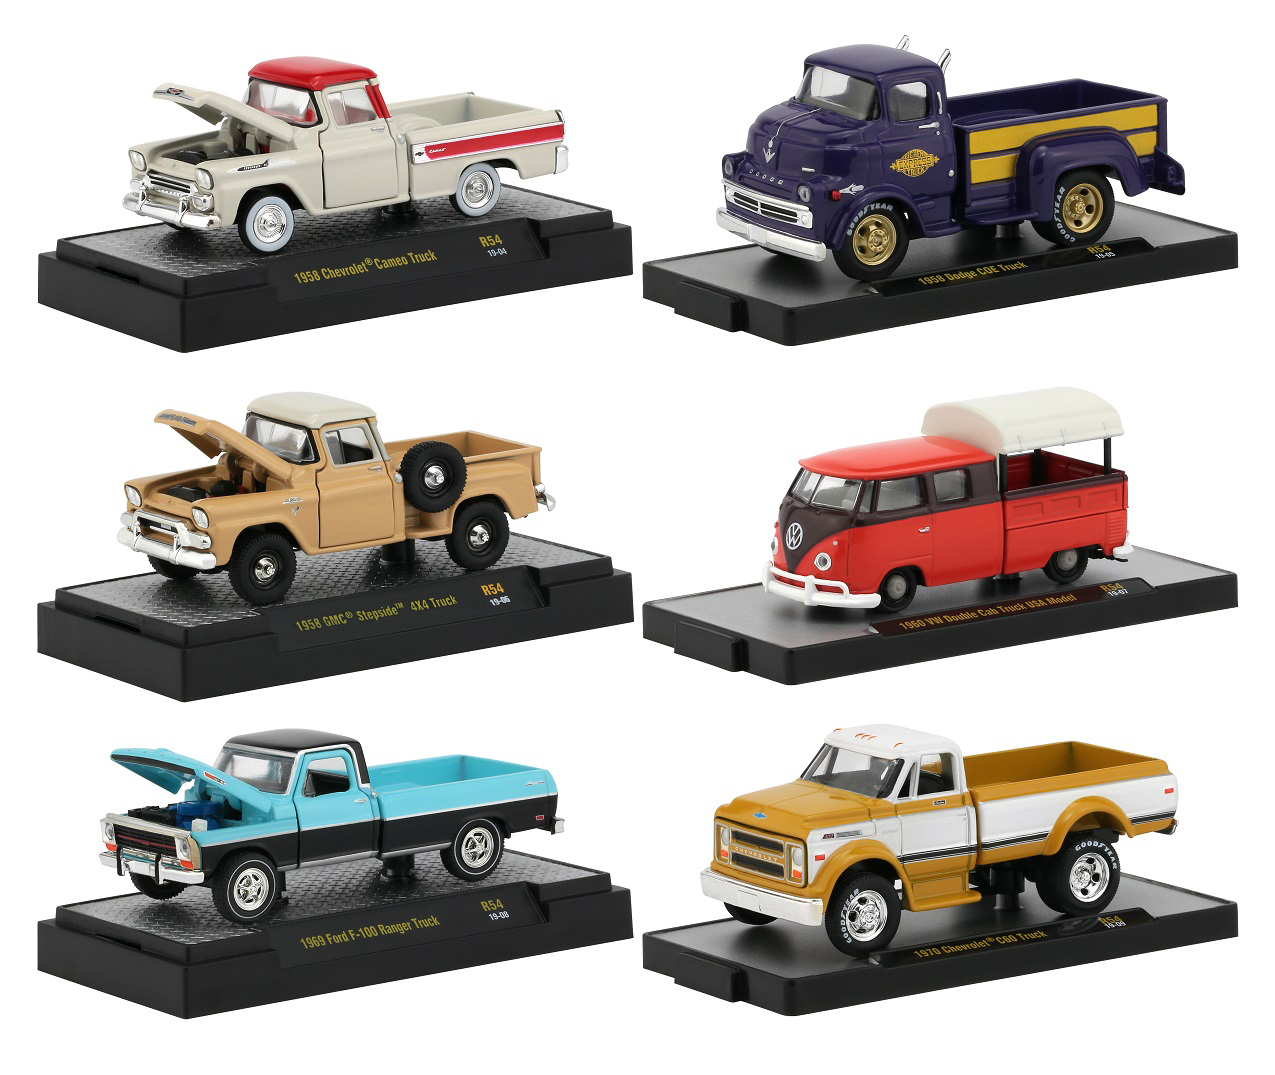 "auto Trucks" 6 Pickup Trucks Set Release 54 In Display Cases 1/64 Diecast Model Cars By M2 Machines